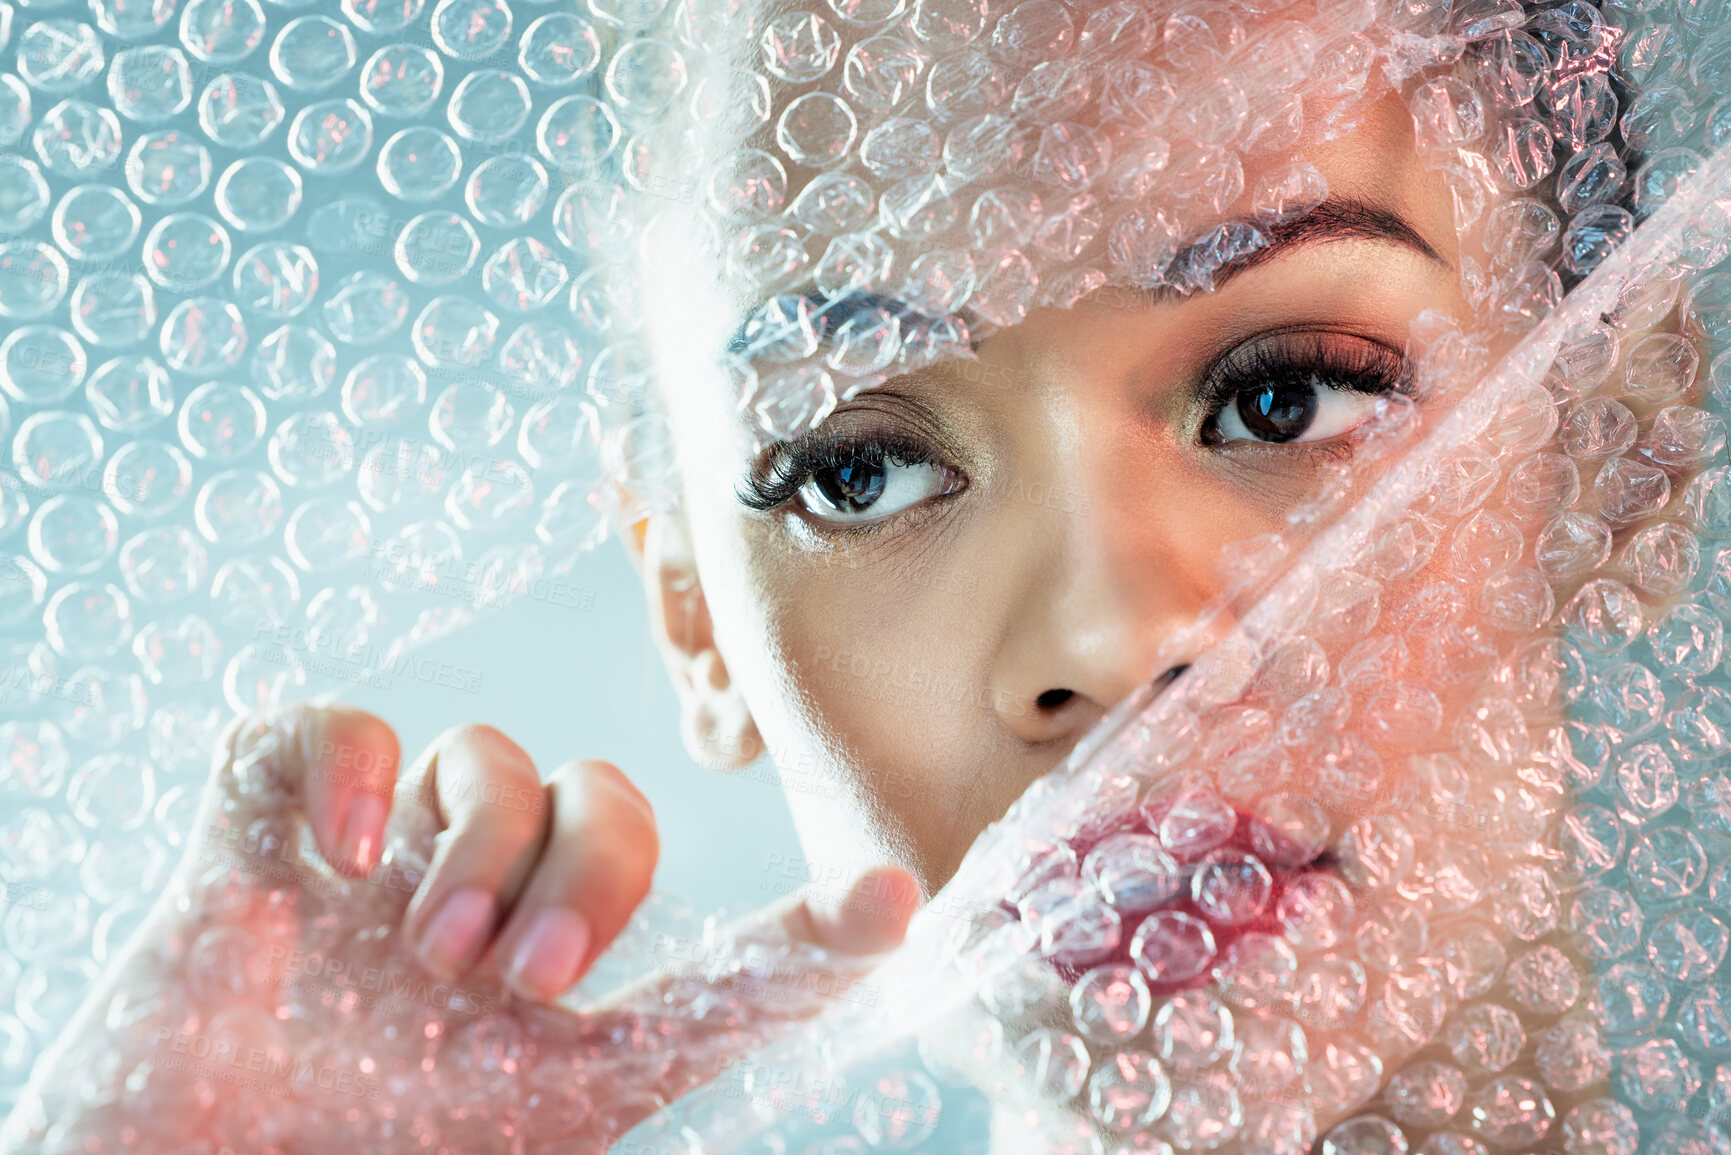 Buy stock photo Bubble wrap, cosmetics and face of woman with makeup, red lipstick and skincare products in studio. Creative art, beauty mockup and girl with facial glow, aesthetic and luxury style with plastic tear